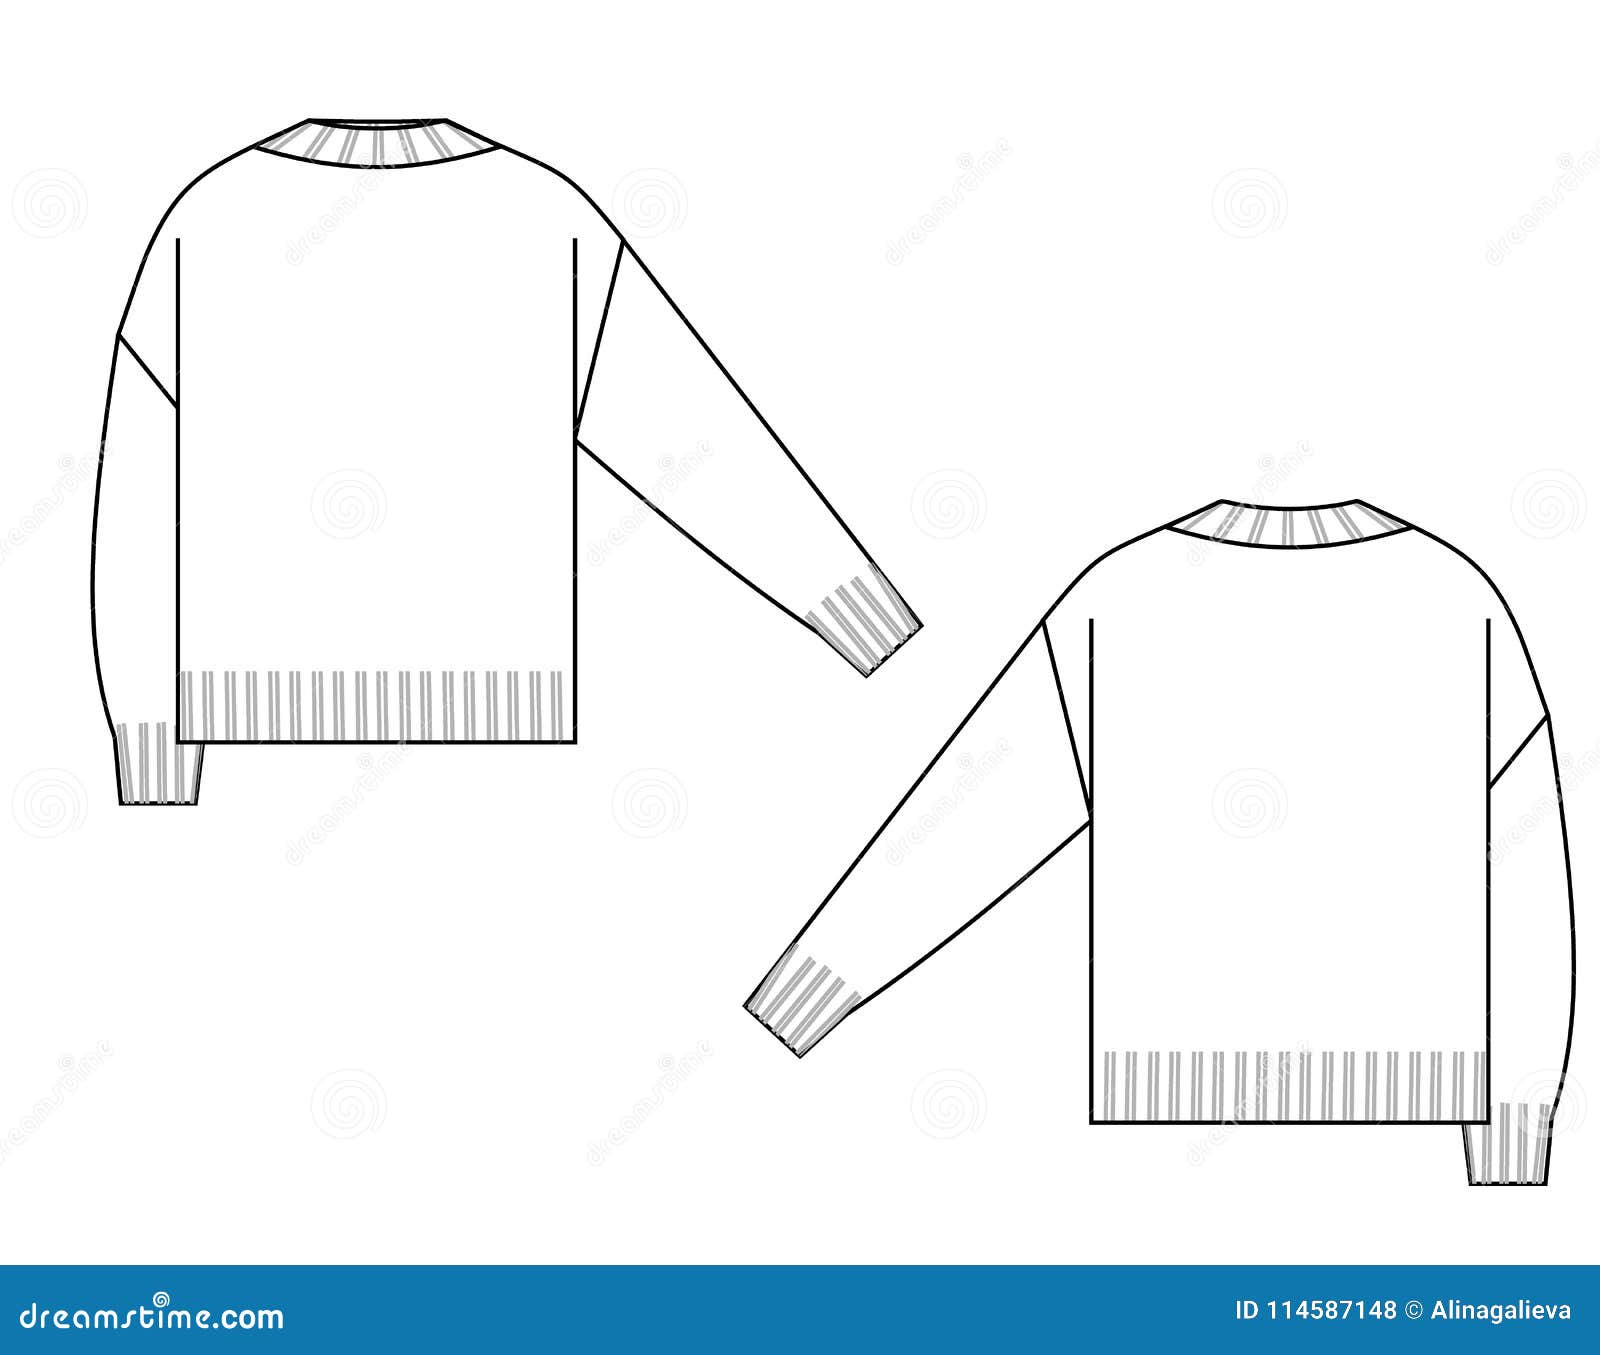 Sweater technical sketch stock vector. Illustration of female - 114587148